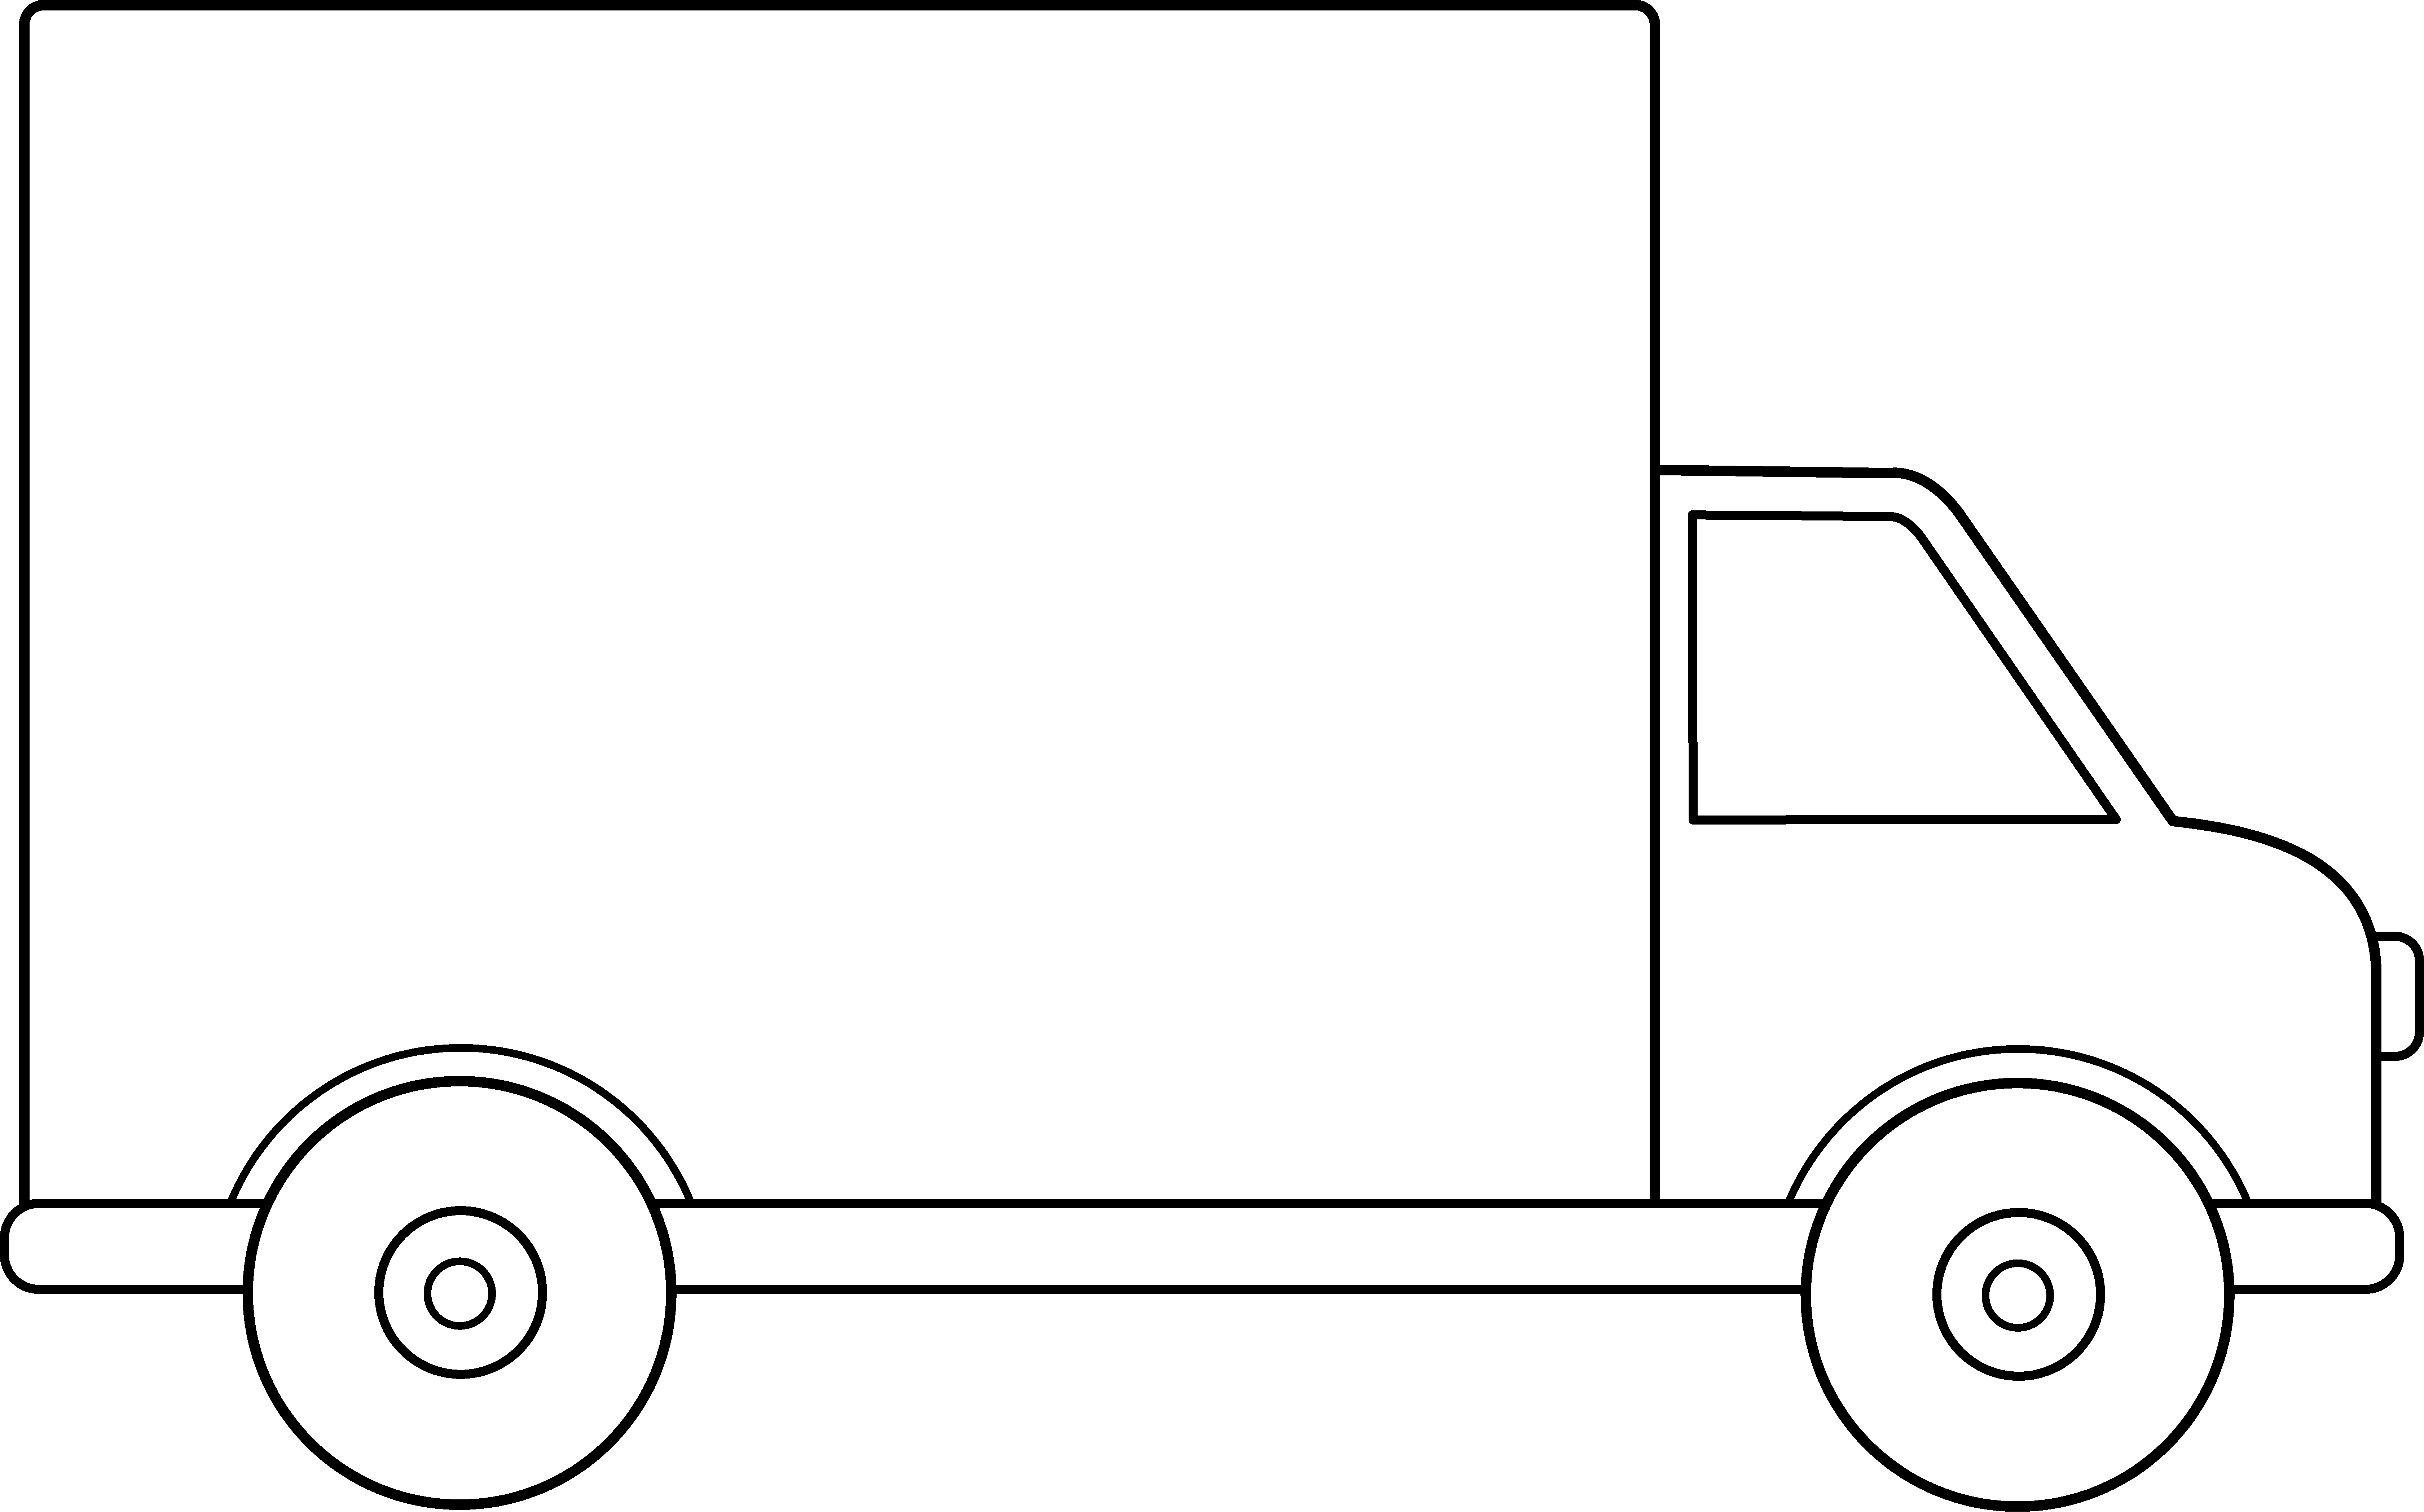 Moving truck clipart black and white